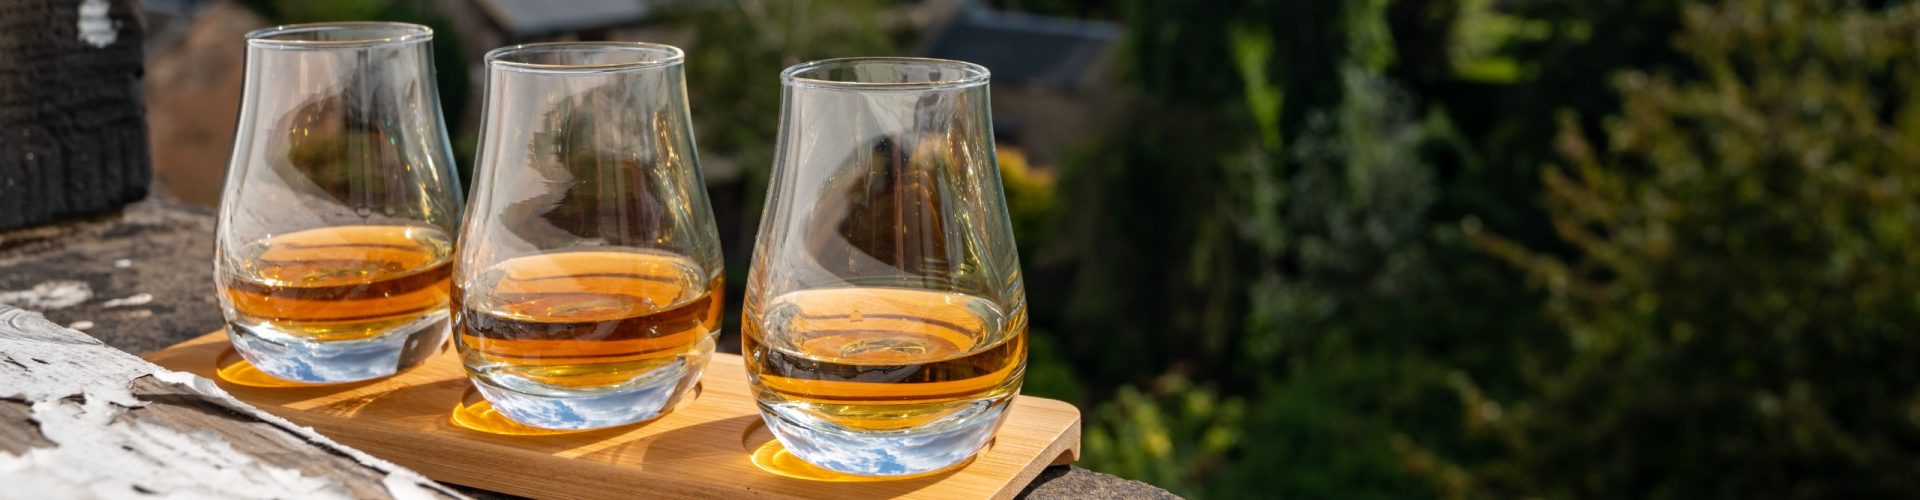 Three glasses of whisky on a window sill